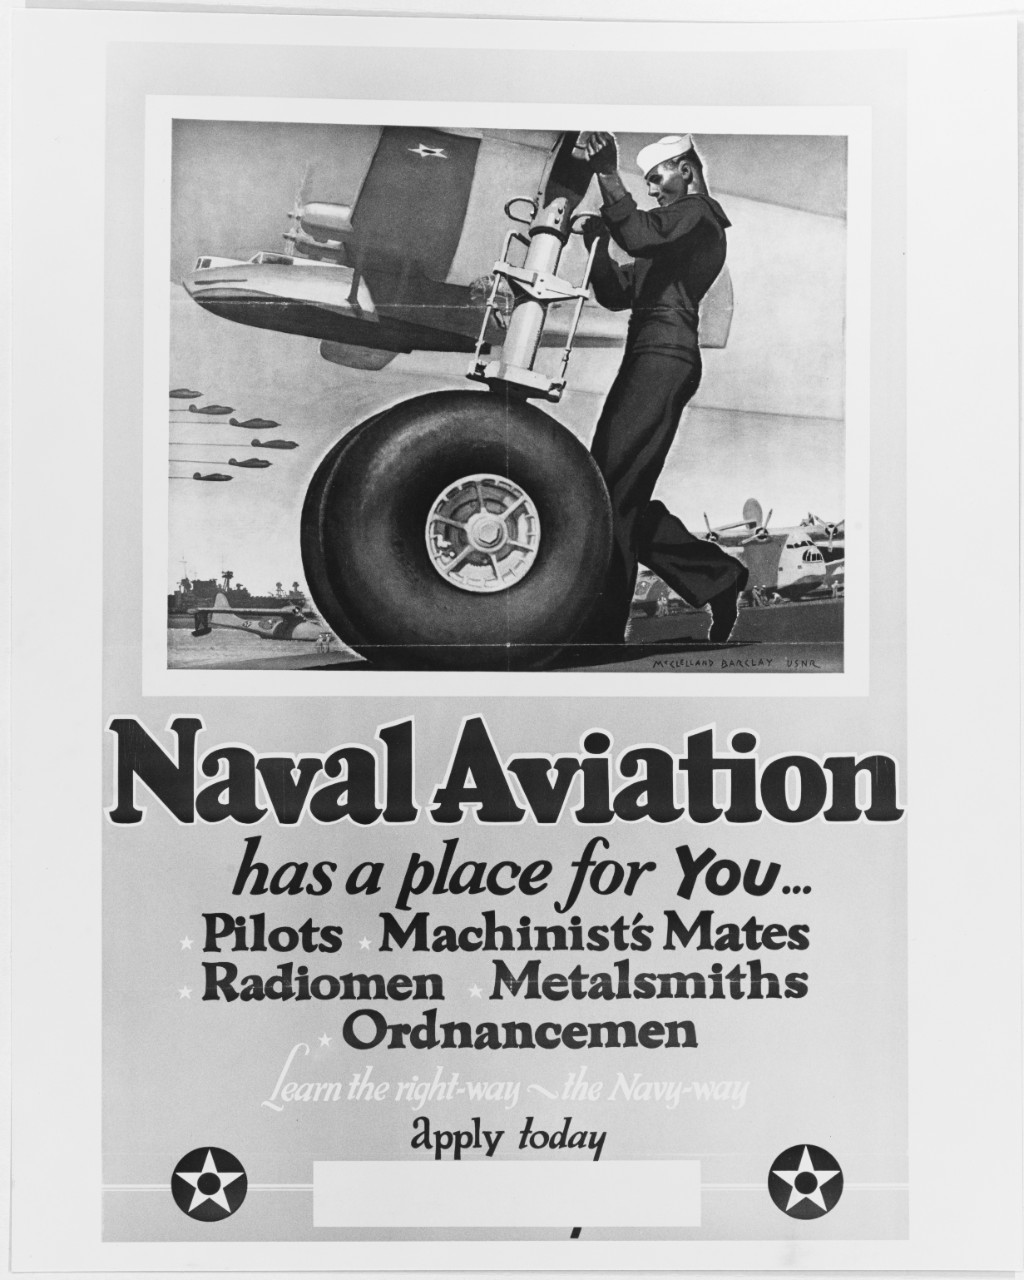 Naval Aviation recruiting poster